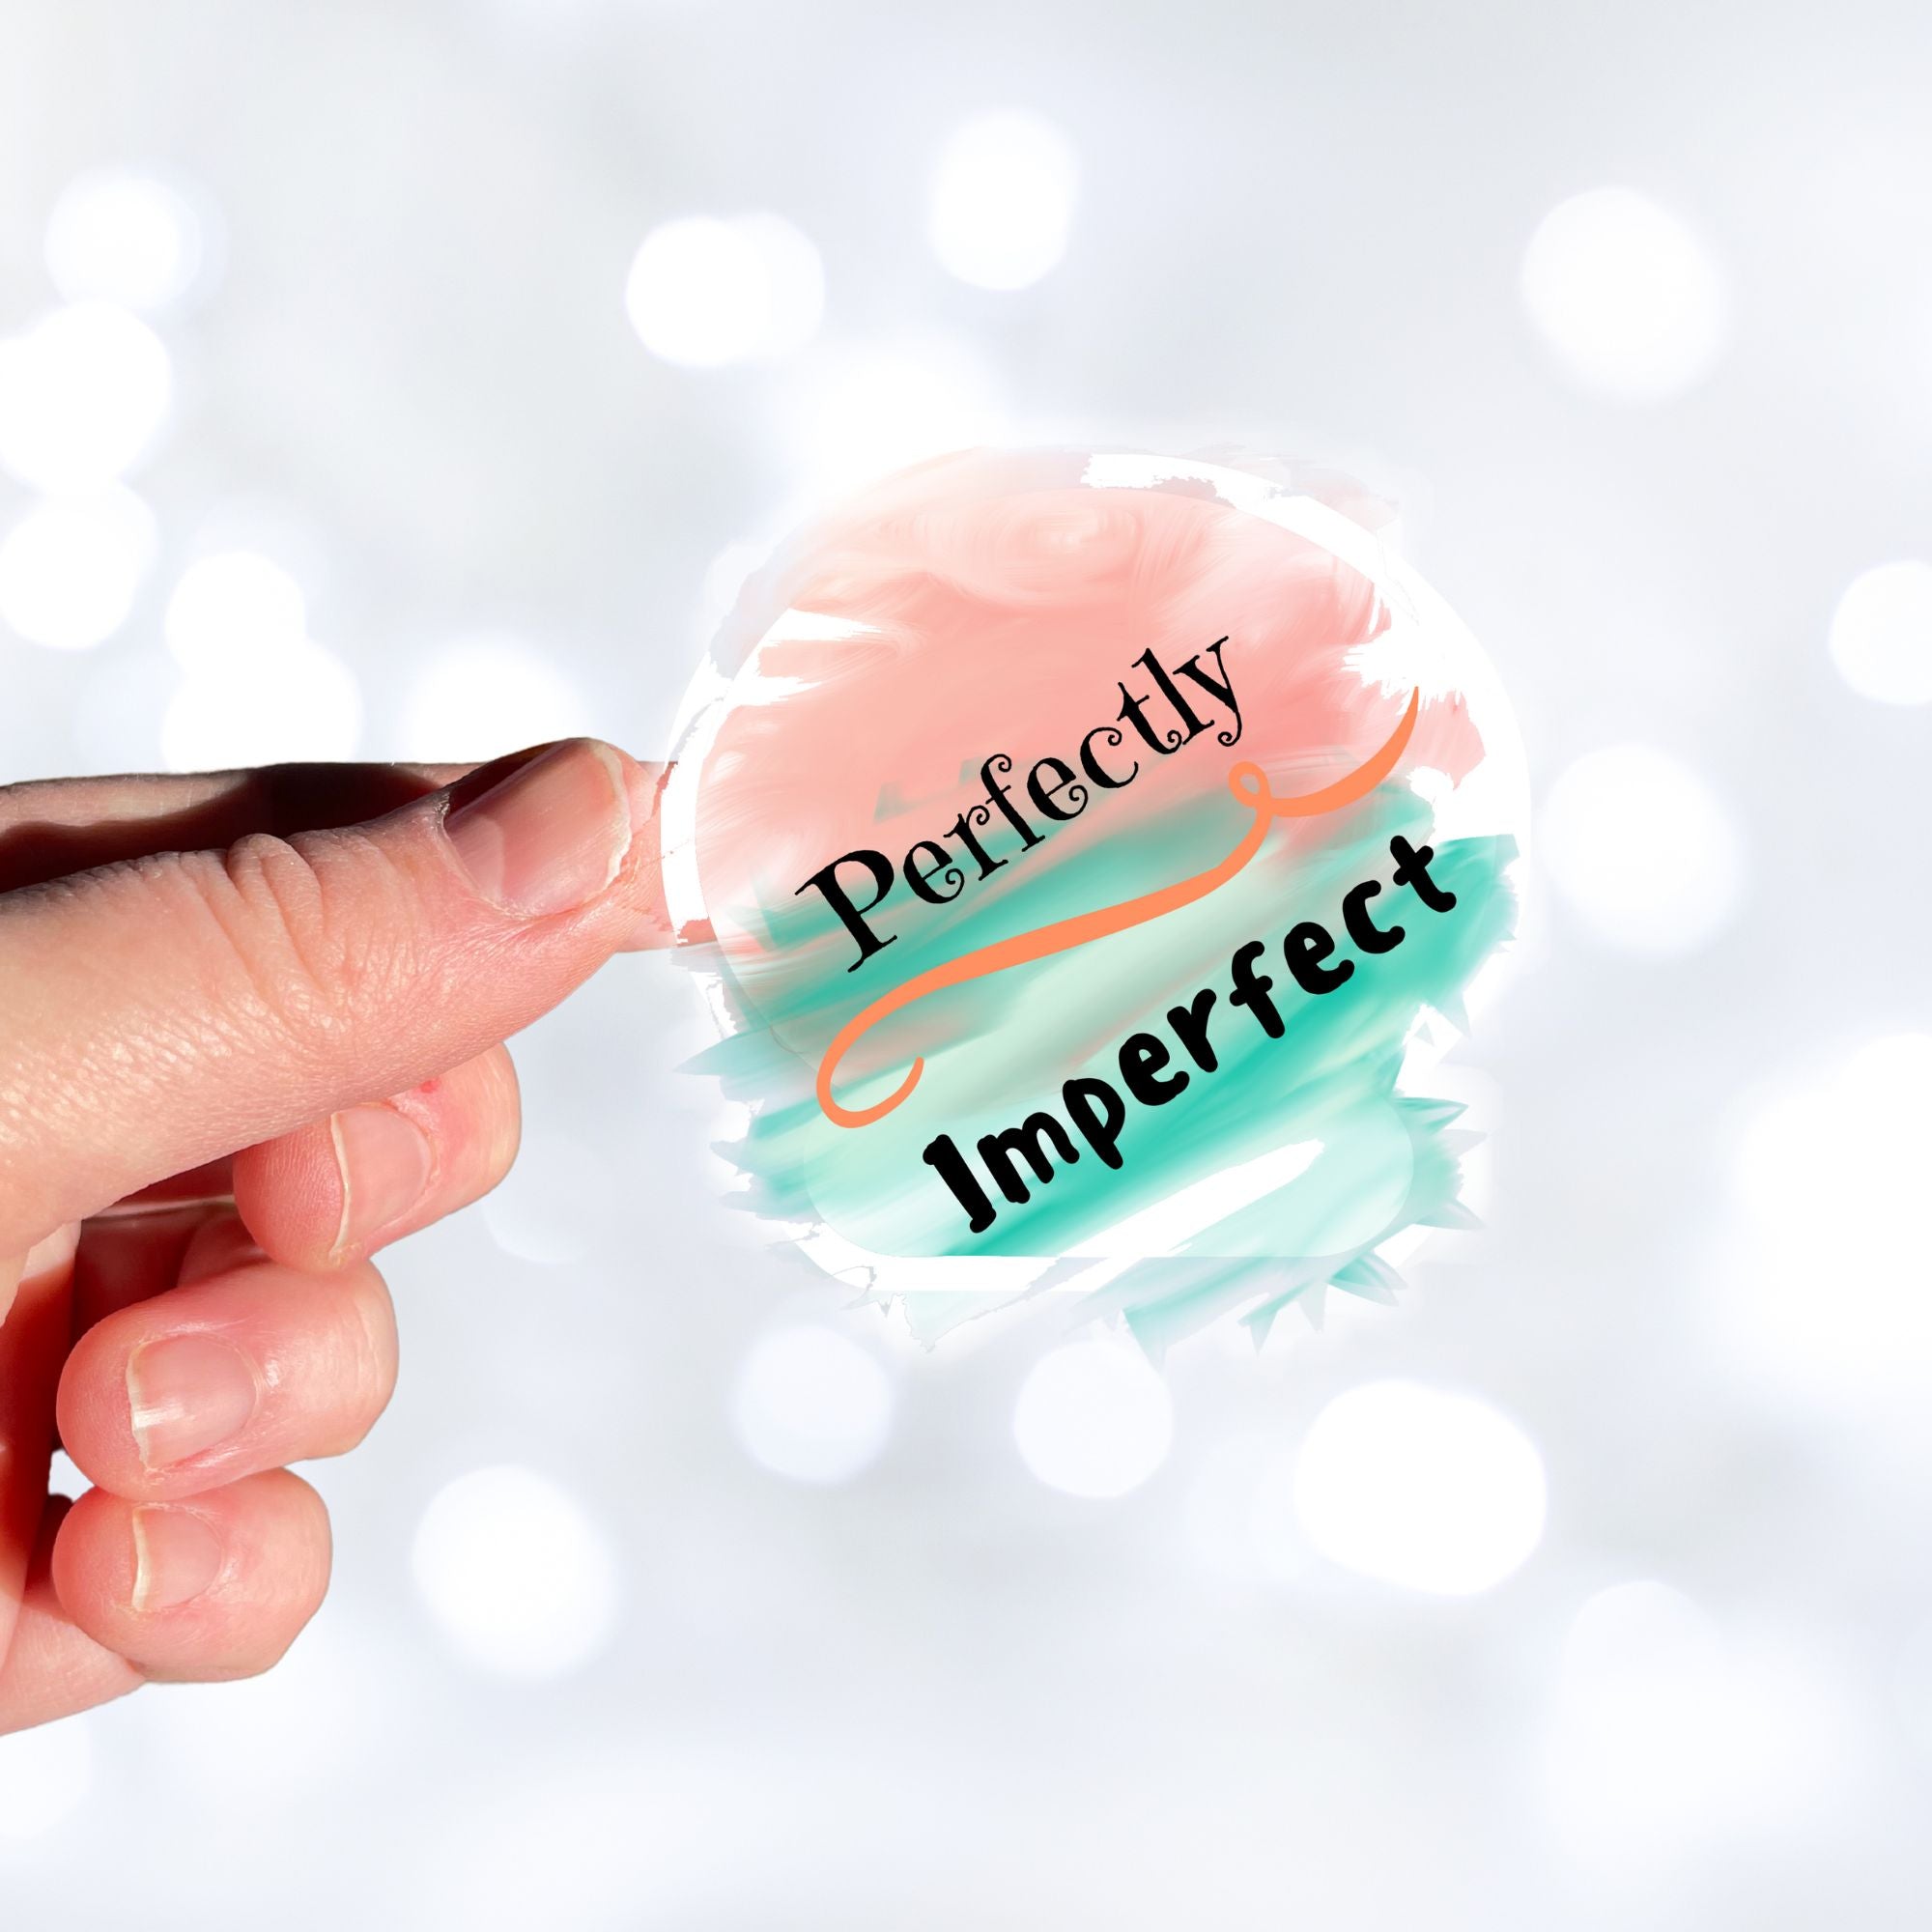 When you think about it, we're ALL Perfectly Imperfect! This inspirational die-cut sticker features the words Perfectly Imperfect on a cloudy pastel background. Check out our Inspirational collection for more inspiring stickers! This image shows a hand holding the Perfectly Imperfect sticker.